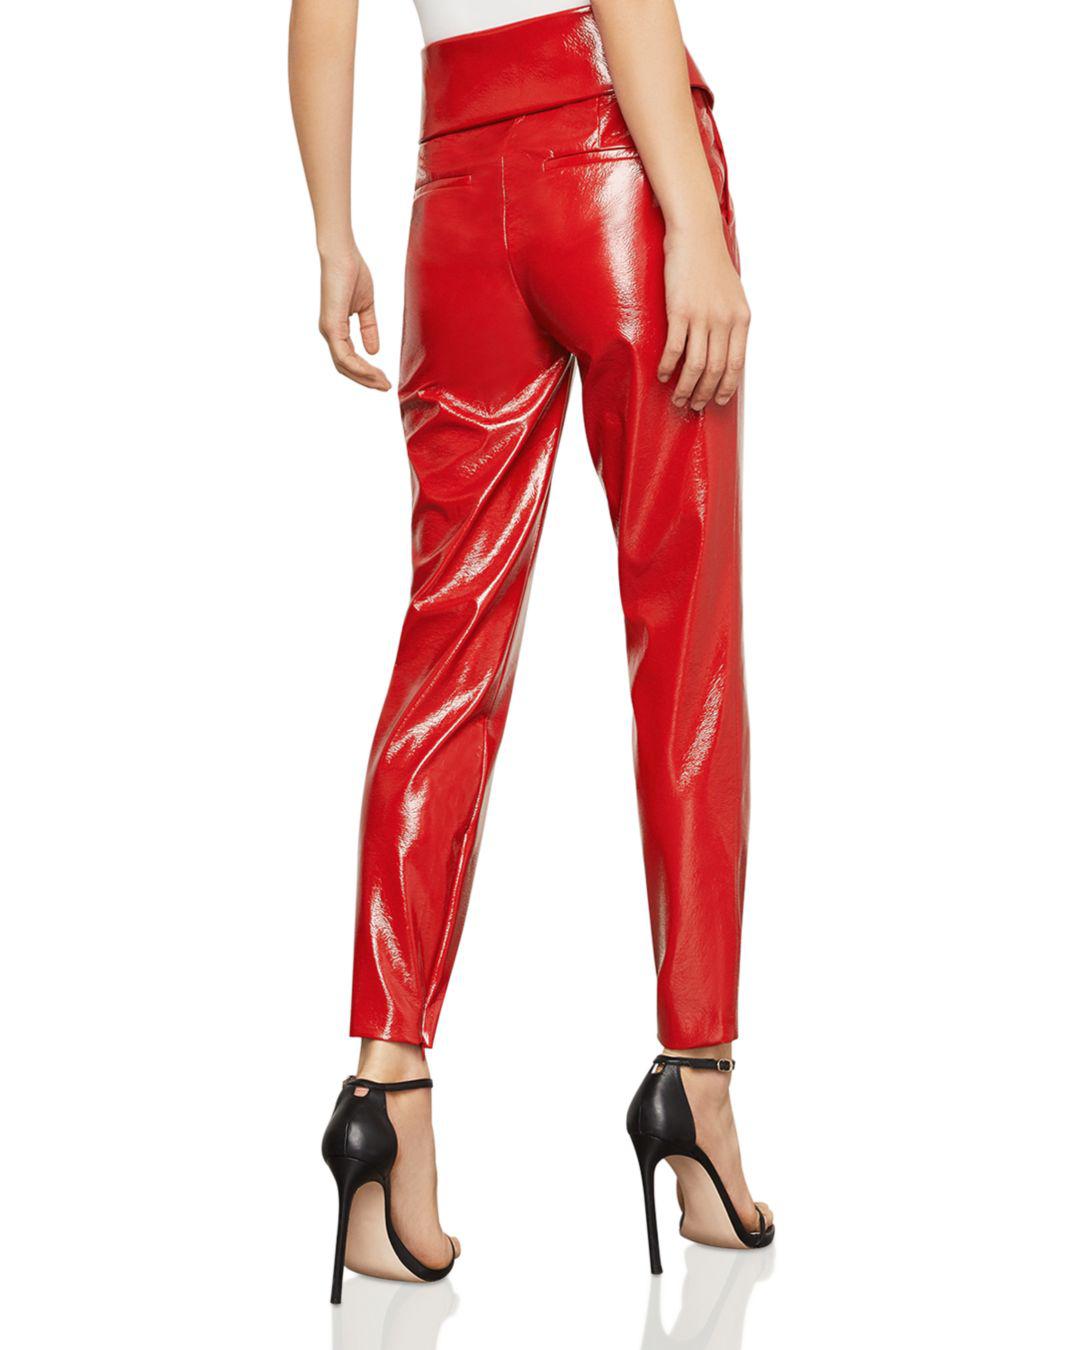 red patent leather leggings